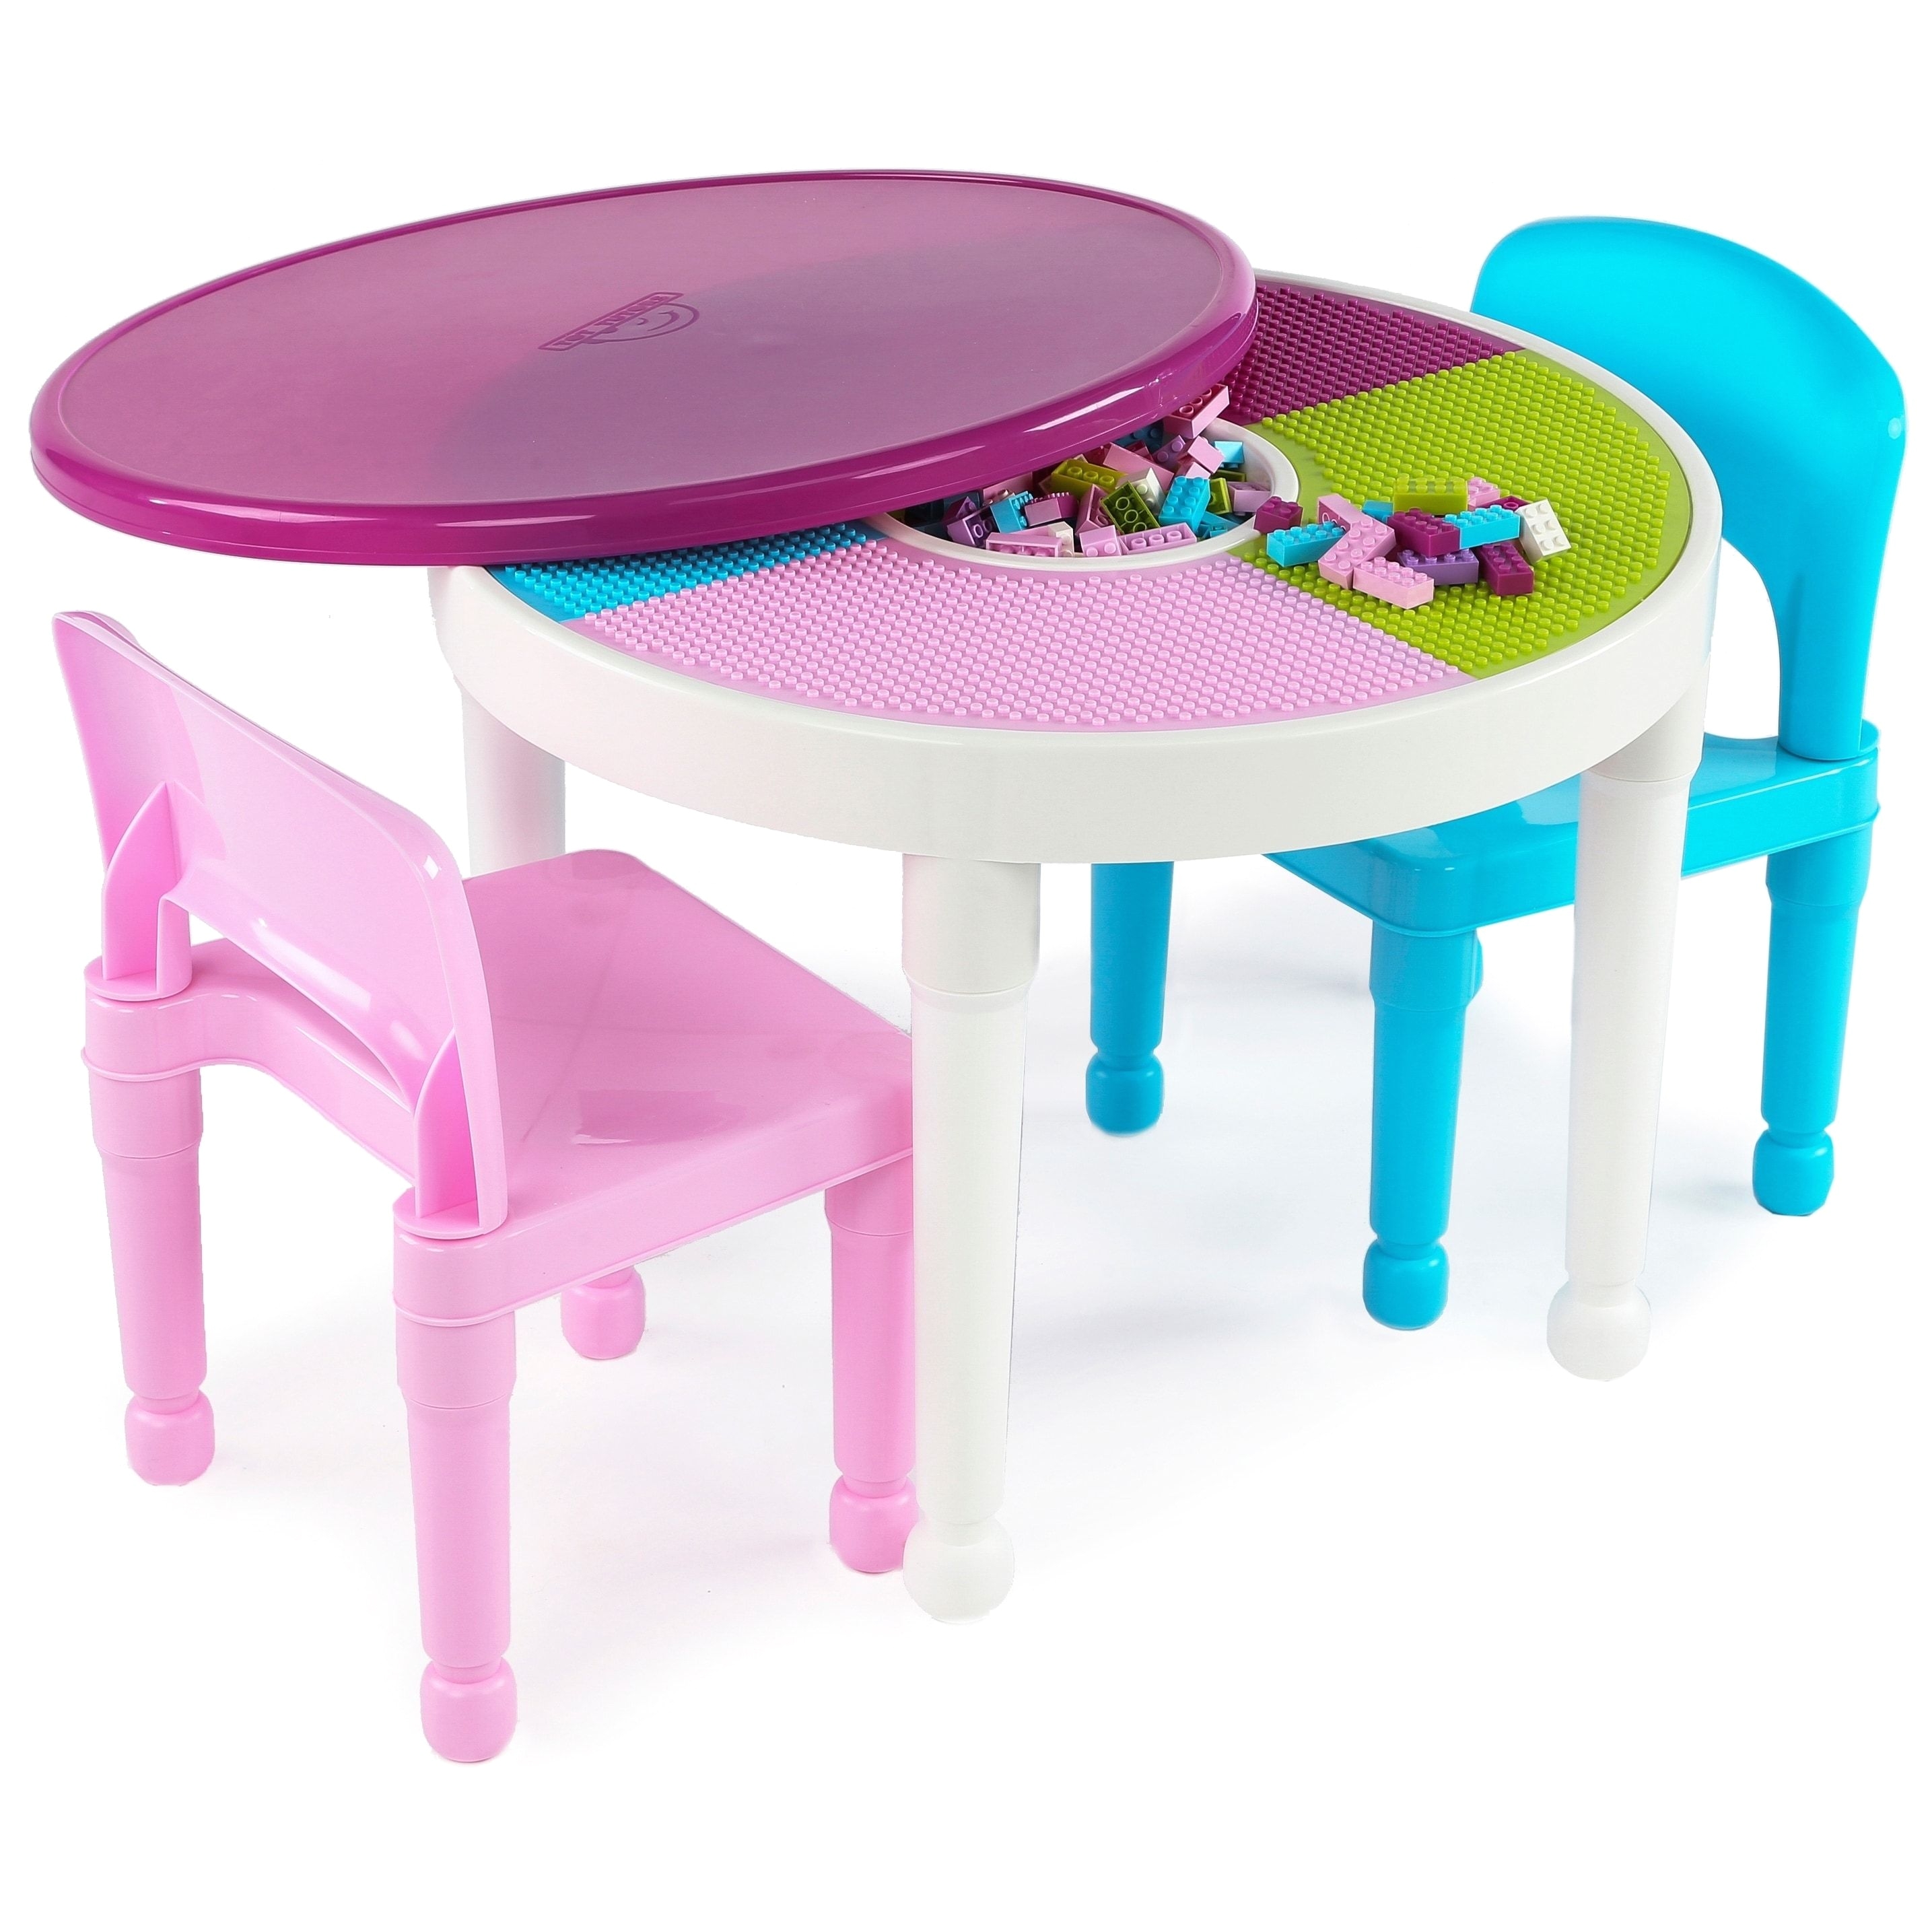 Little Tikes Table and Chair Set Primary Kids 2 In 1 Plastic Activity Table 2 Chairs Set White Bright